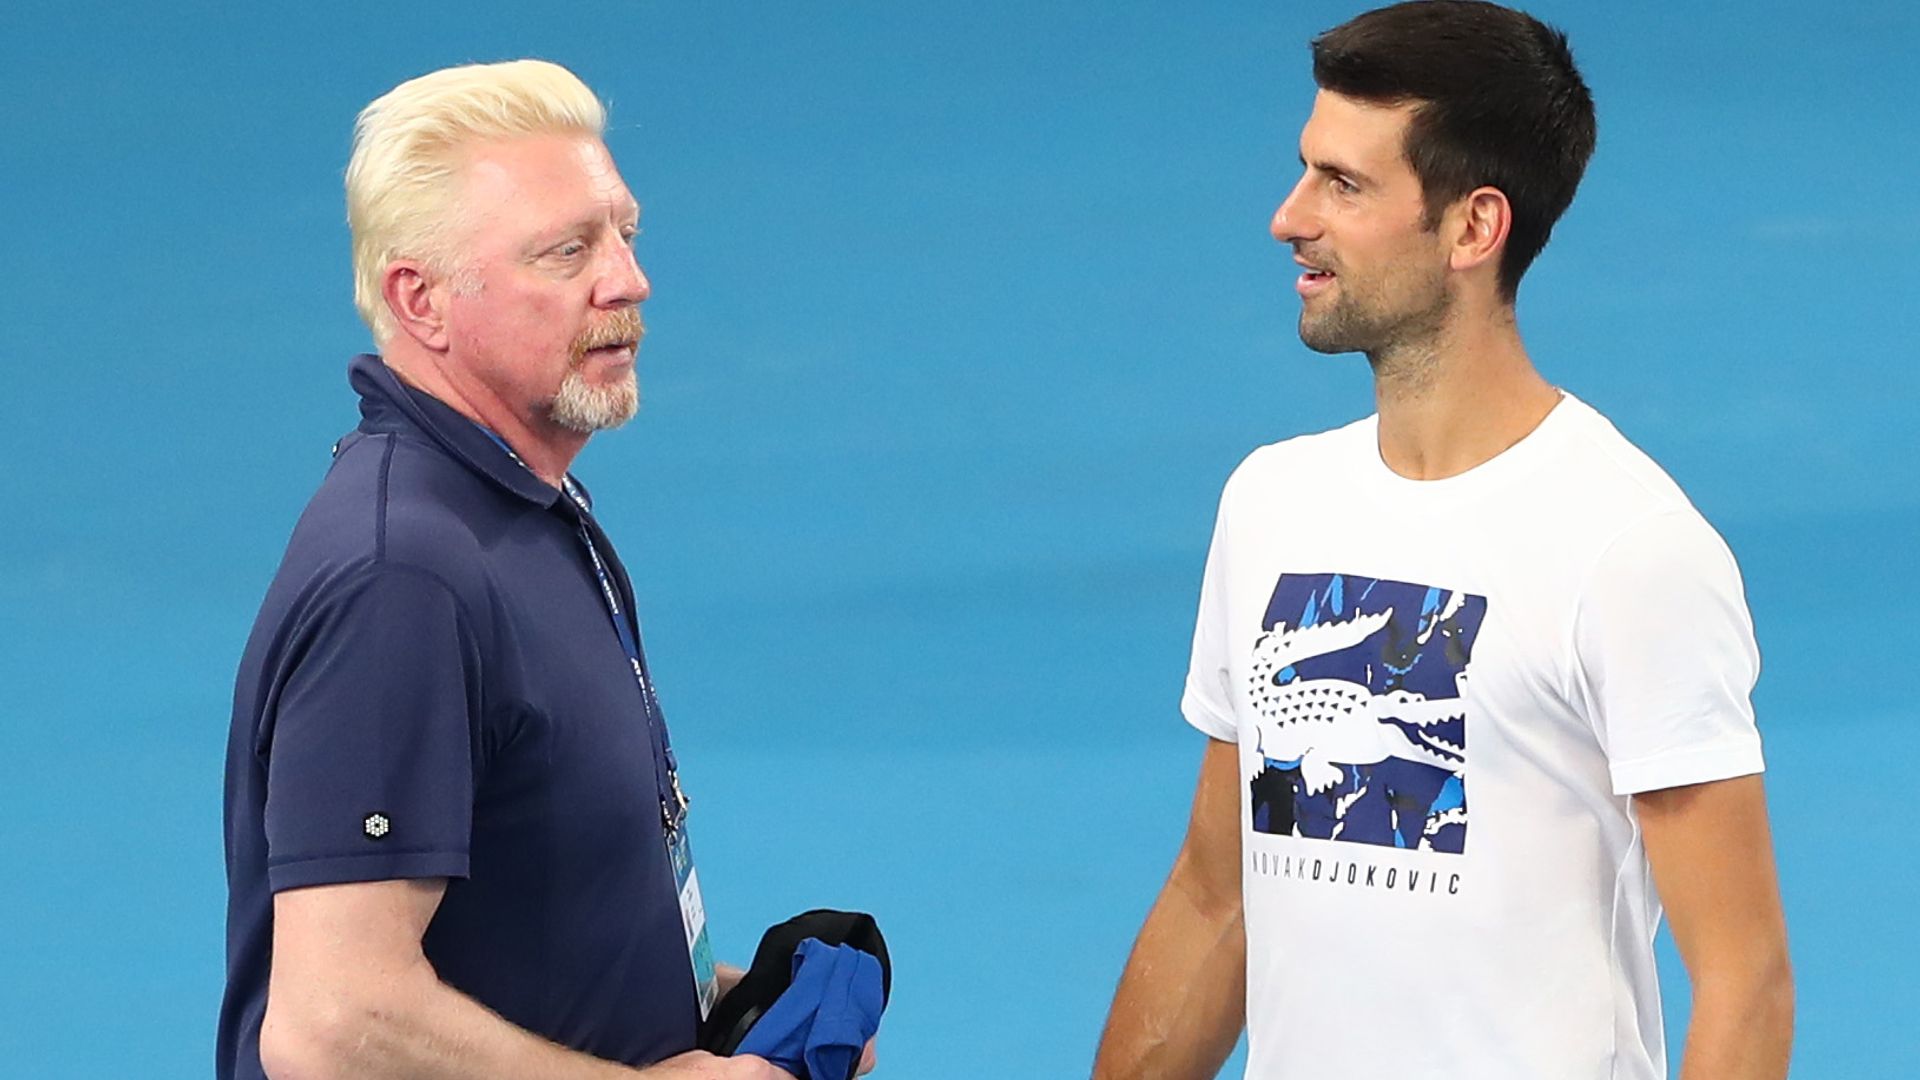 Djokovic offers support to Becker's family | 'I hope he stays strong'